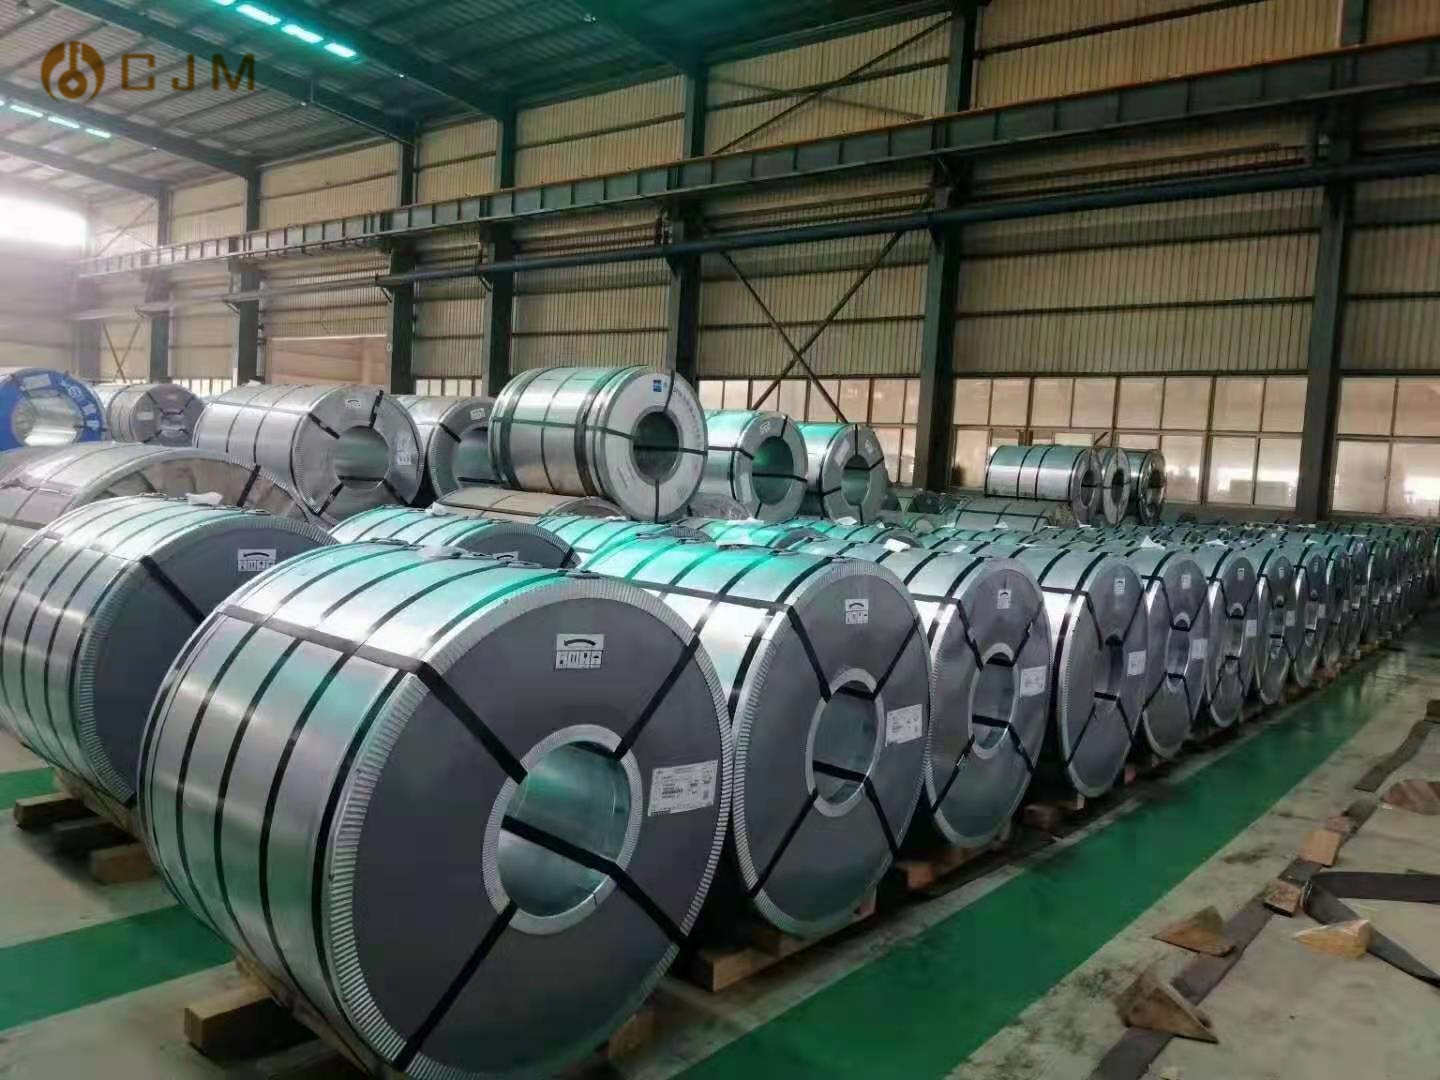 Type 2205 Polished Coloured Cold Rolled Stainless Steel Coil